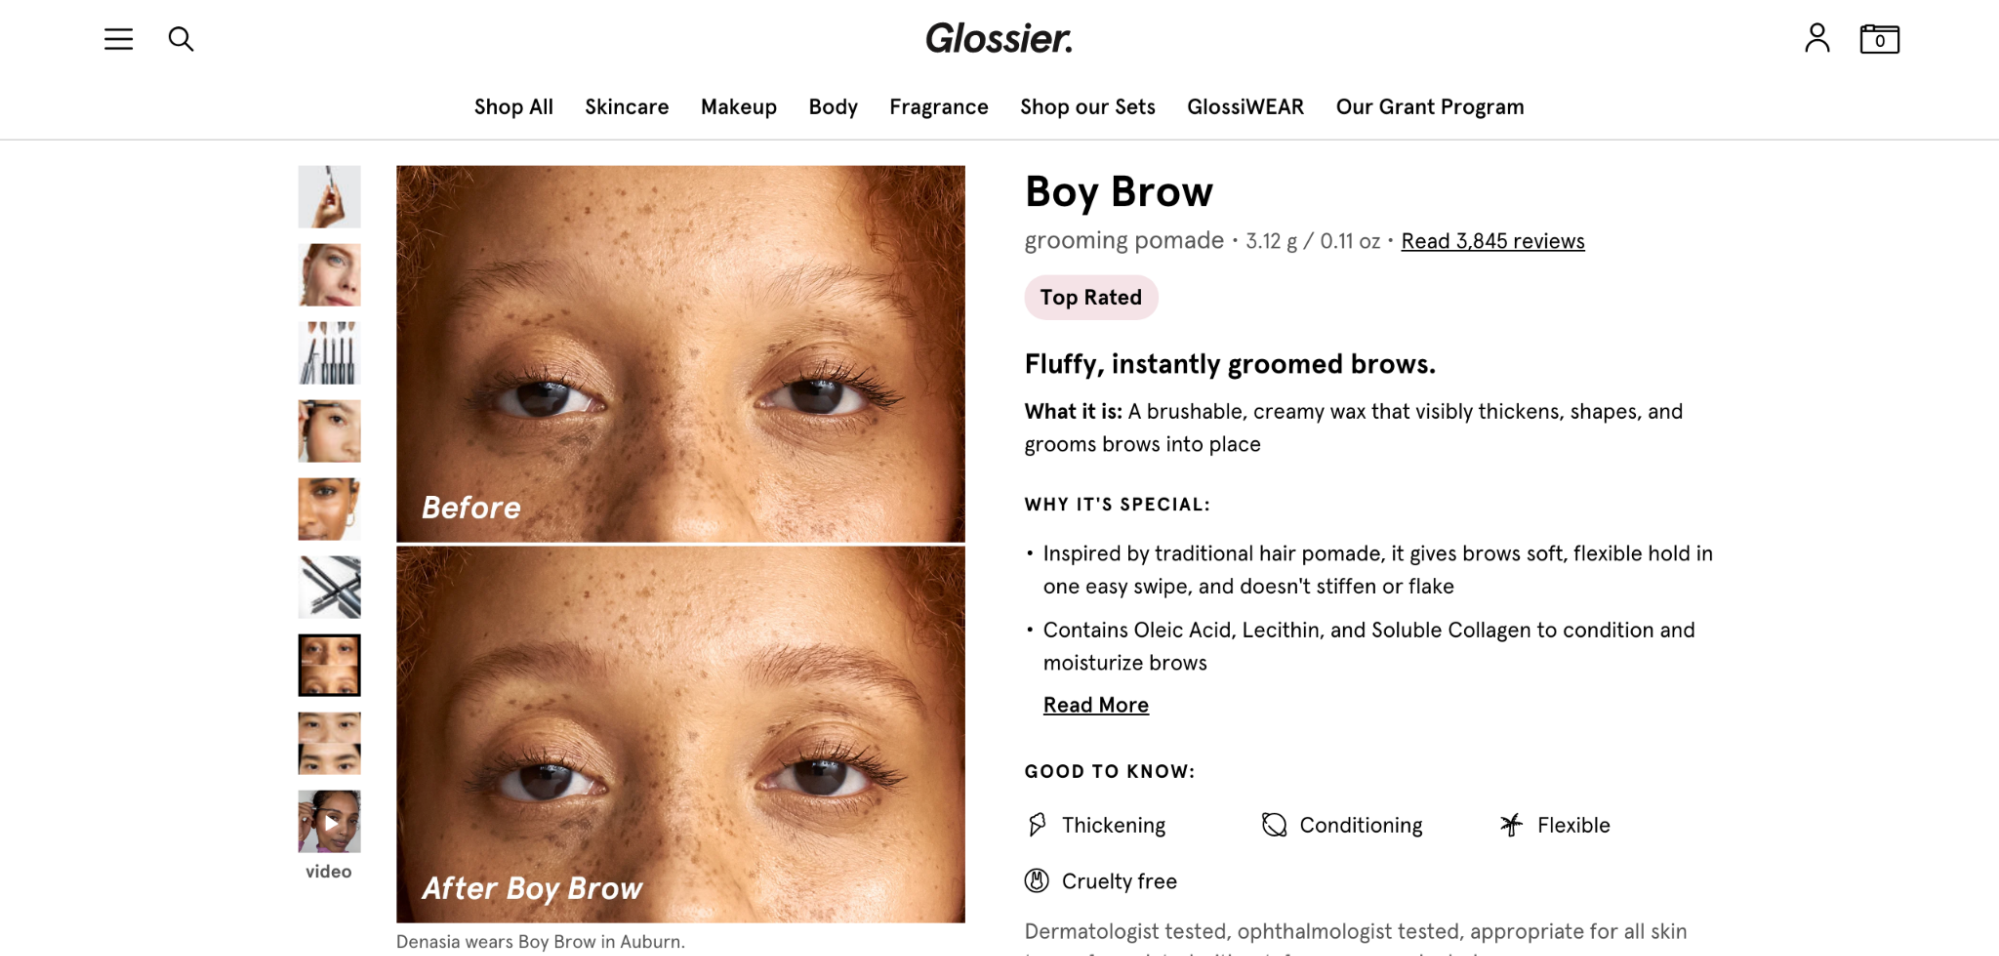 glossier's website is a great example of effective product photography